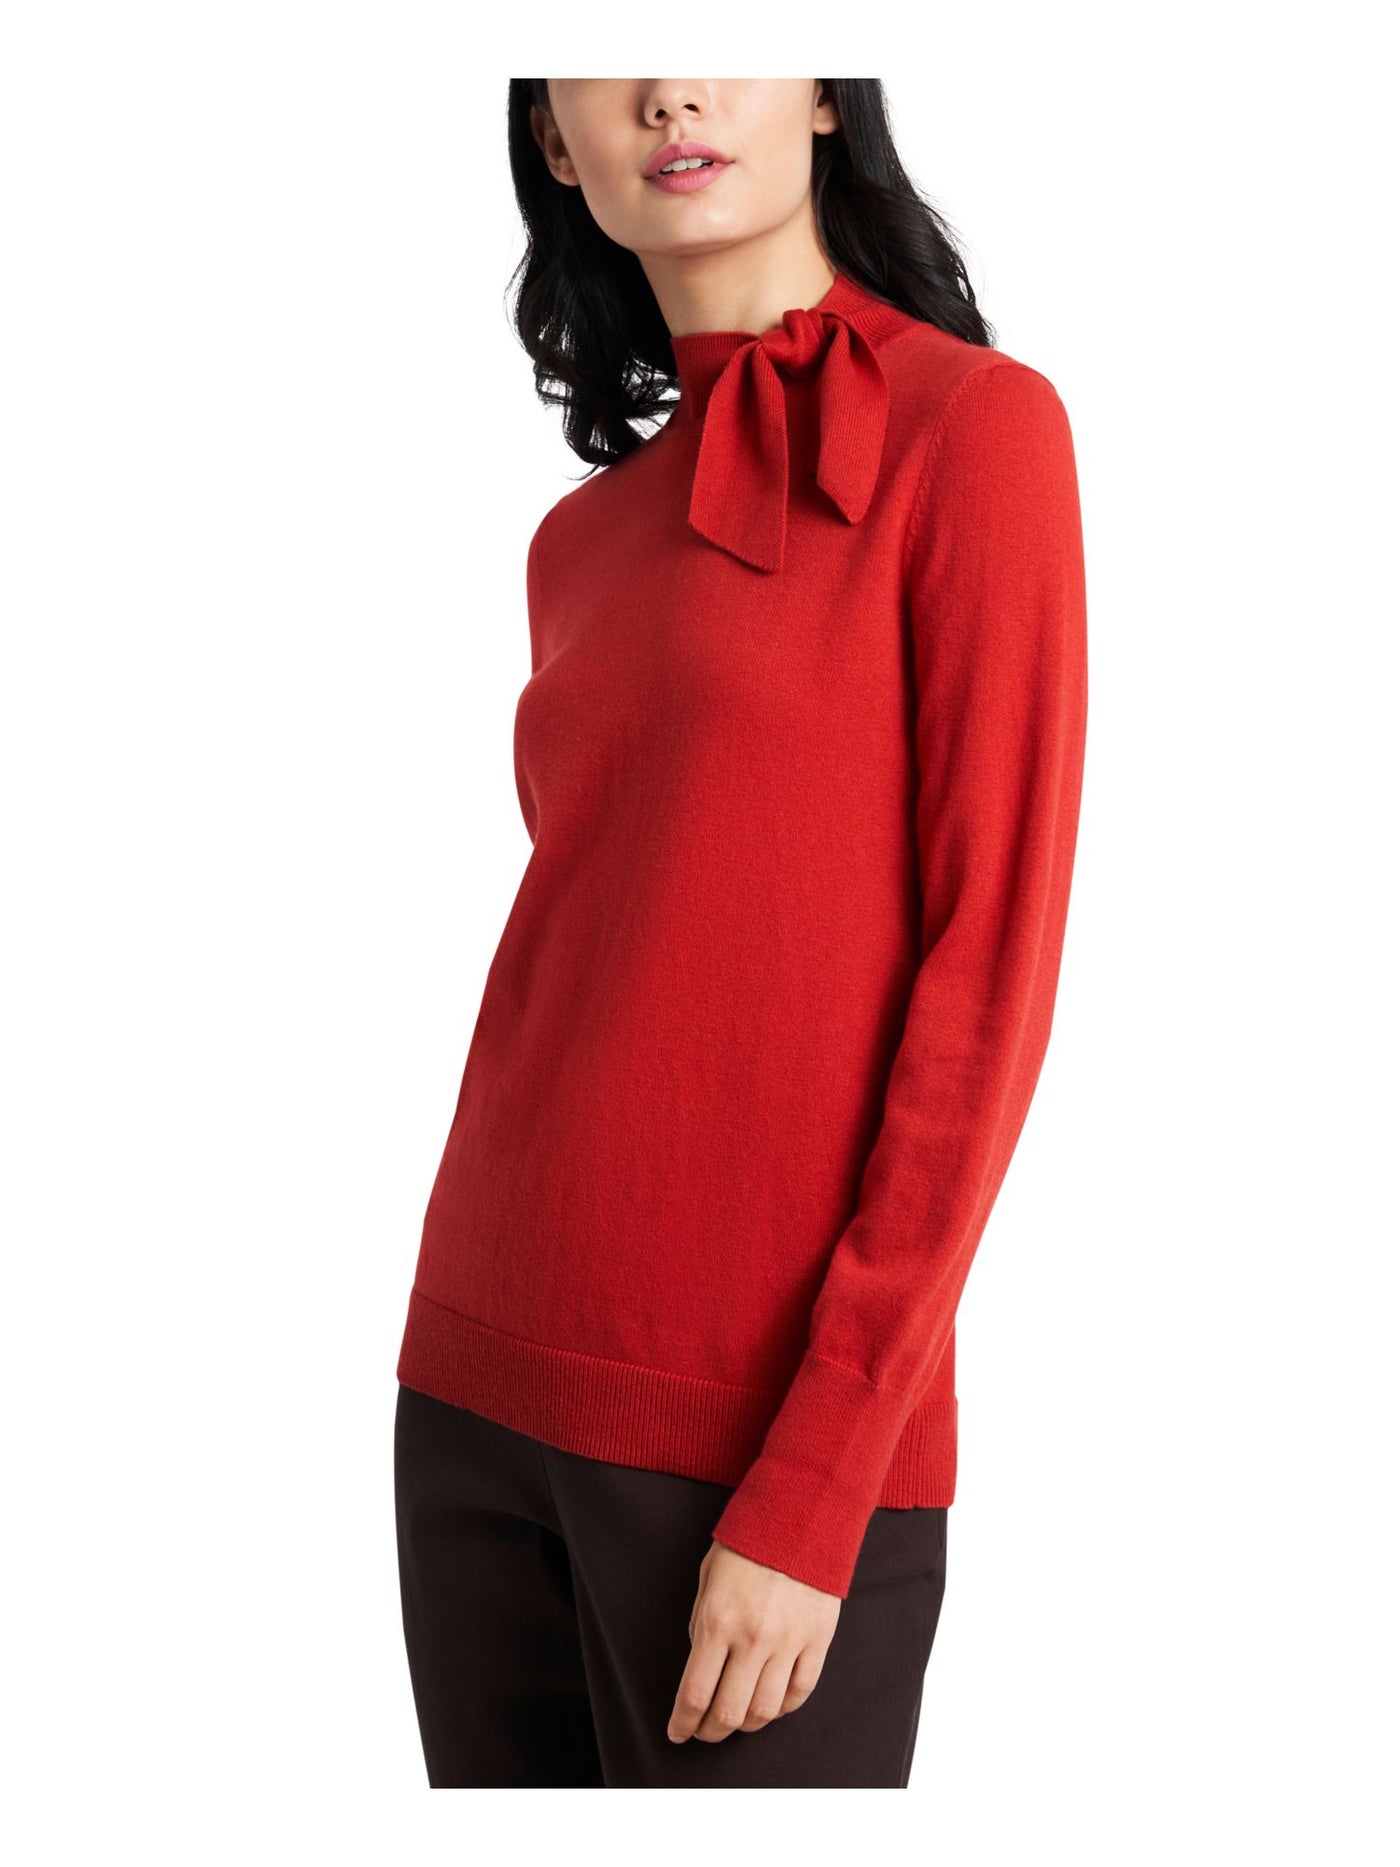 RILEY&RAE Womens Red Long Sleeve Tie Neck Sweater M